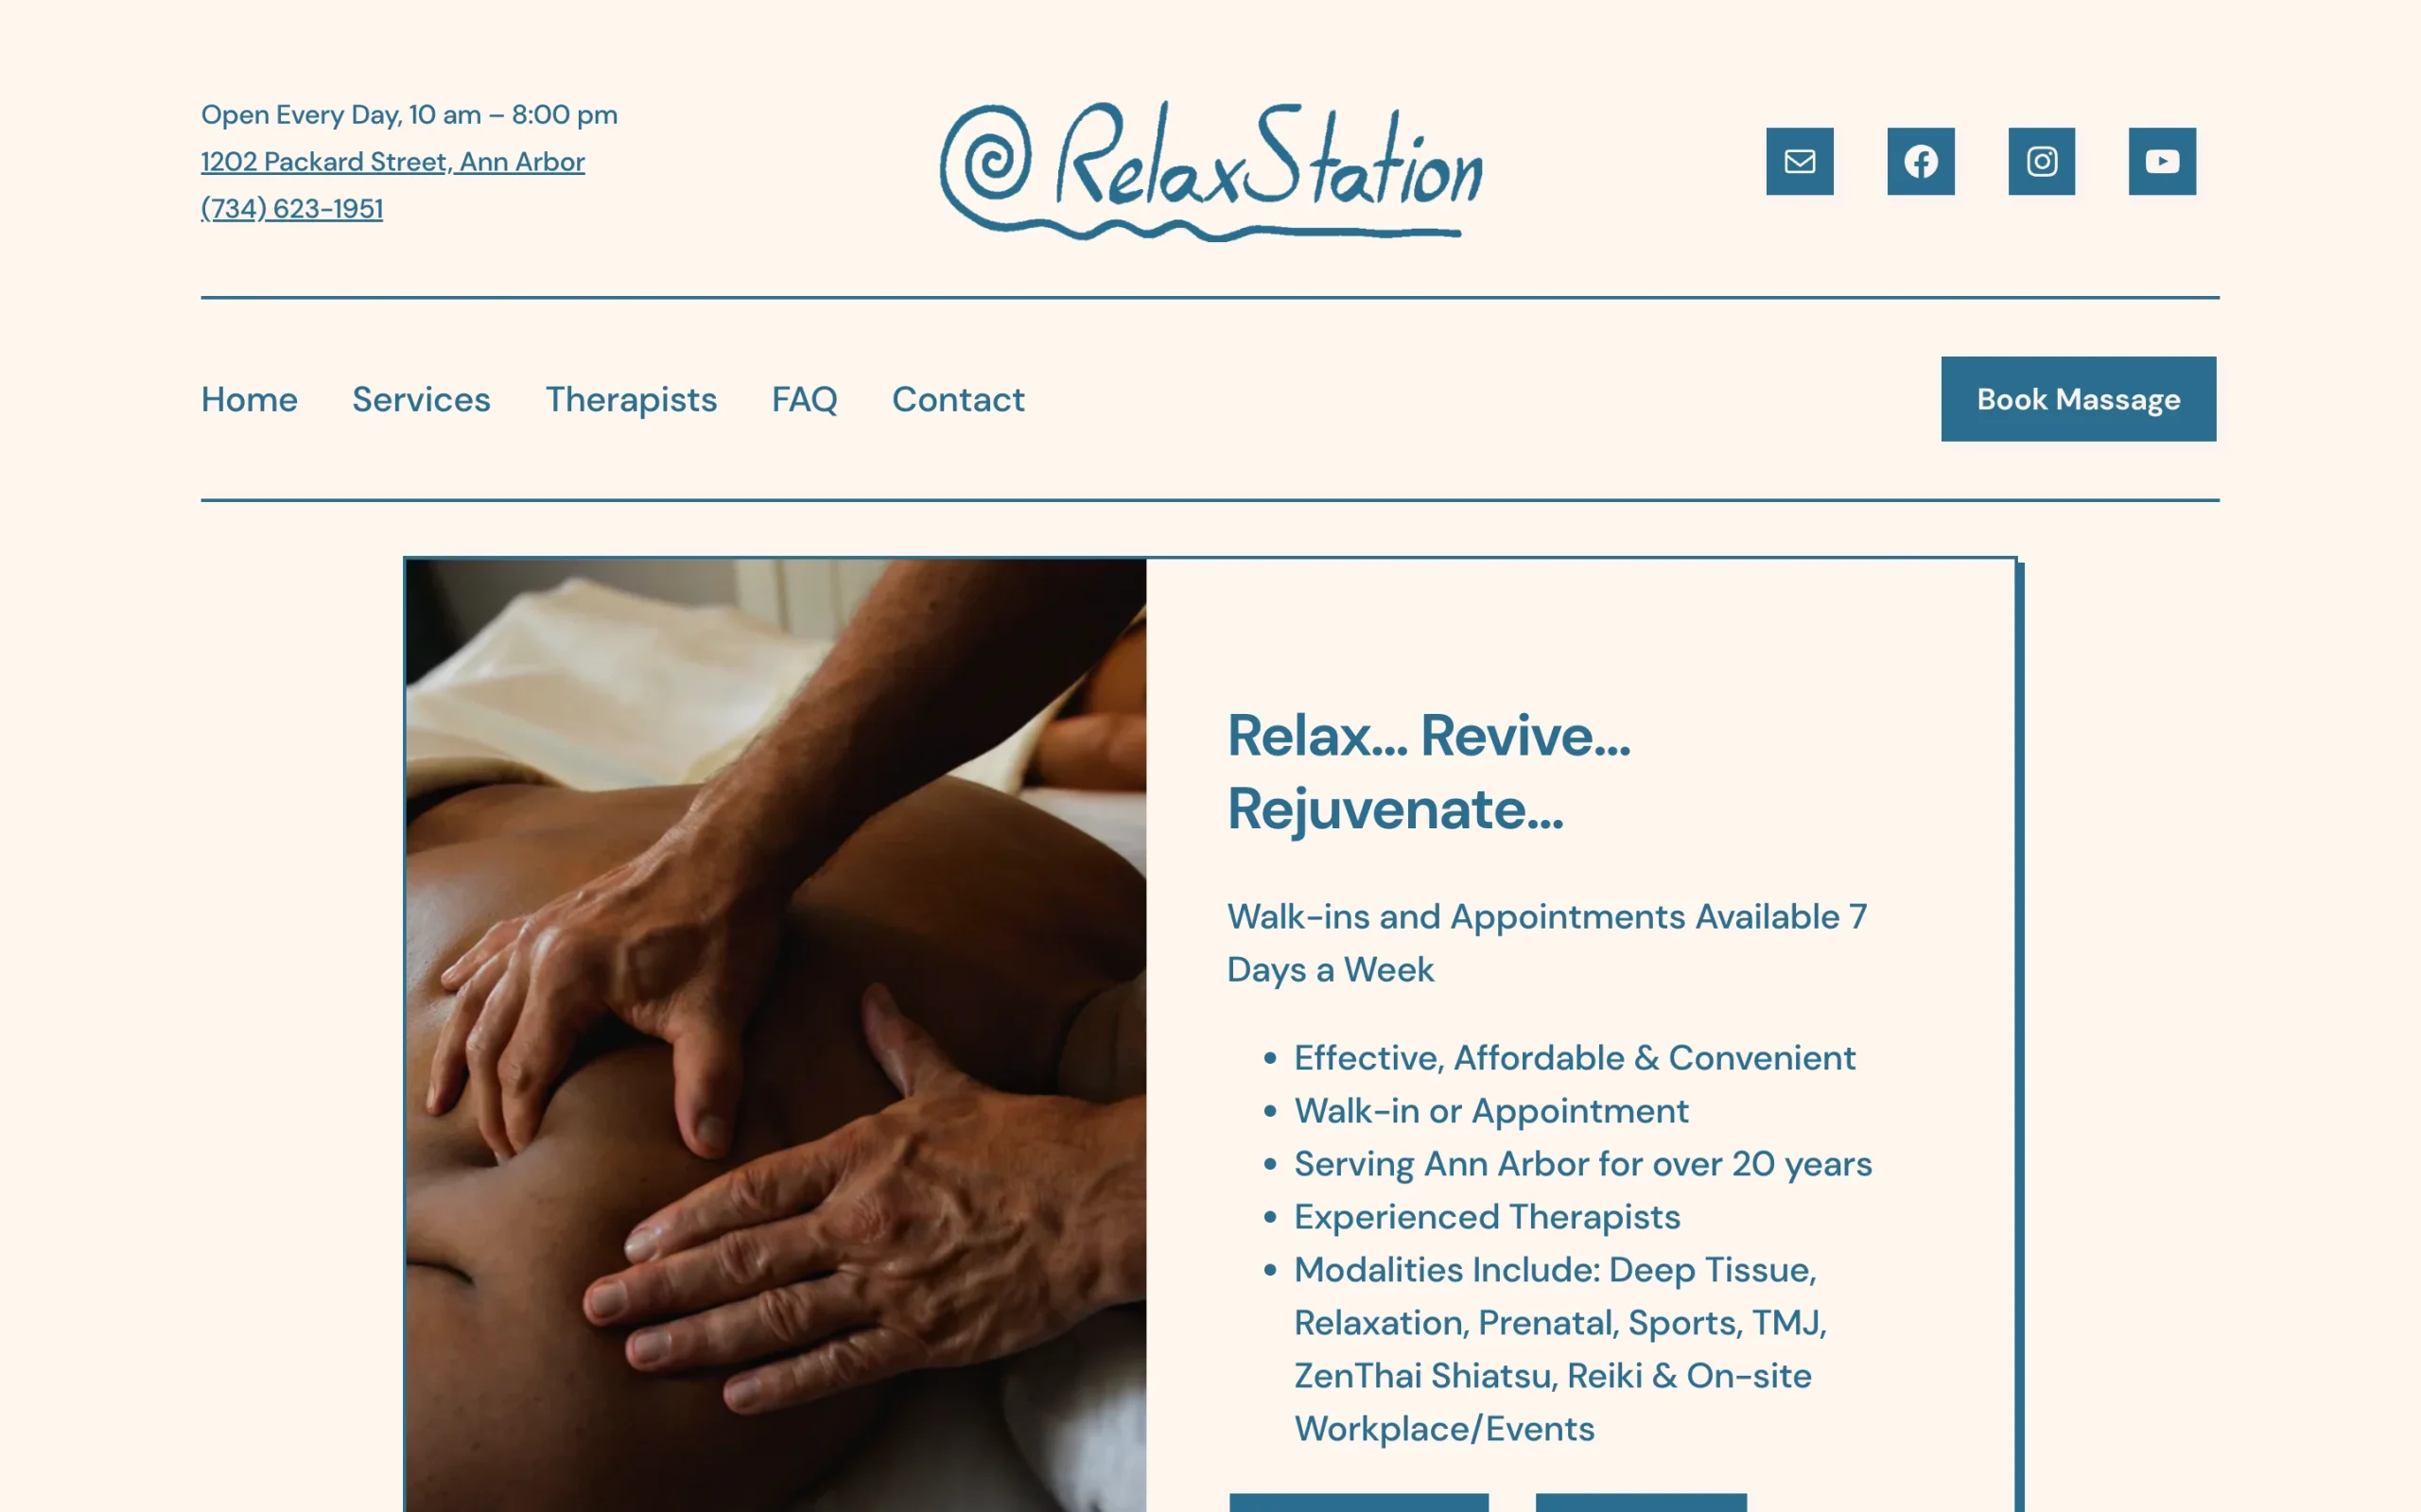 Landing page of the Relax Station website